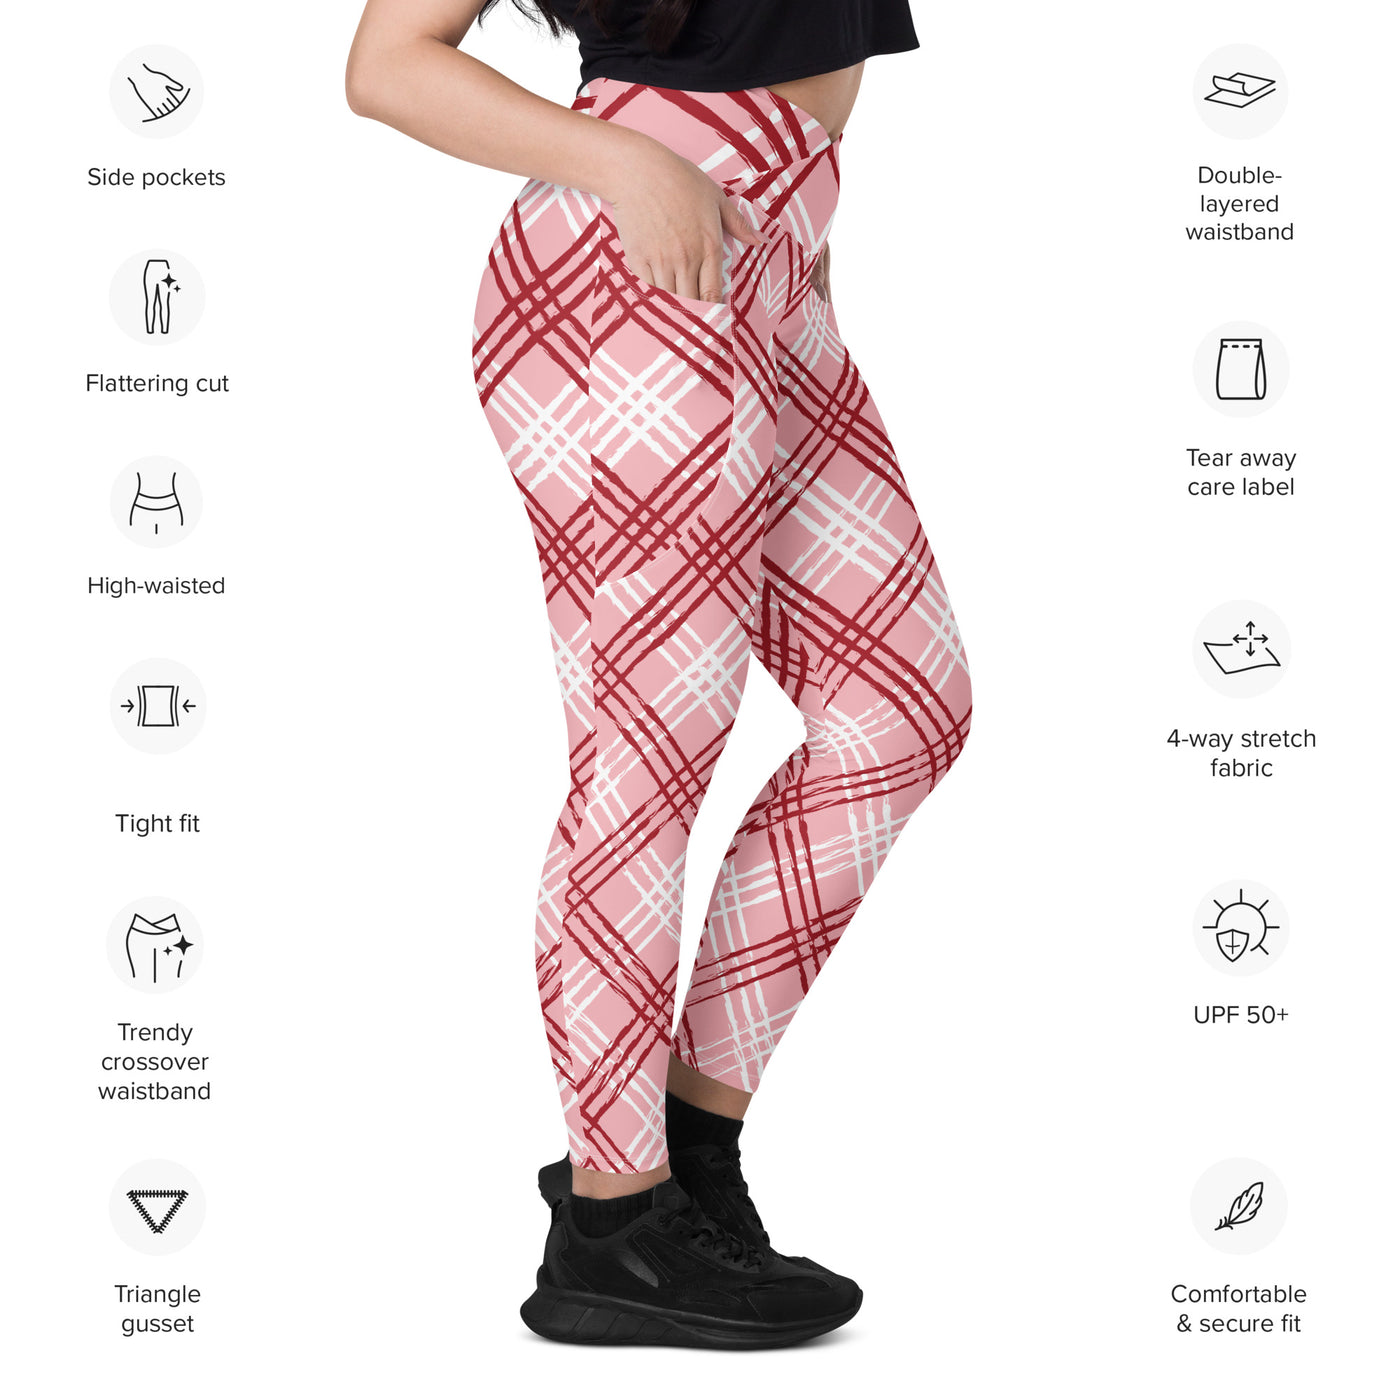 Berry Twist Plaid Plus Size Crossover Leggings with Pockets